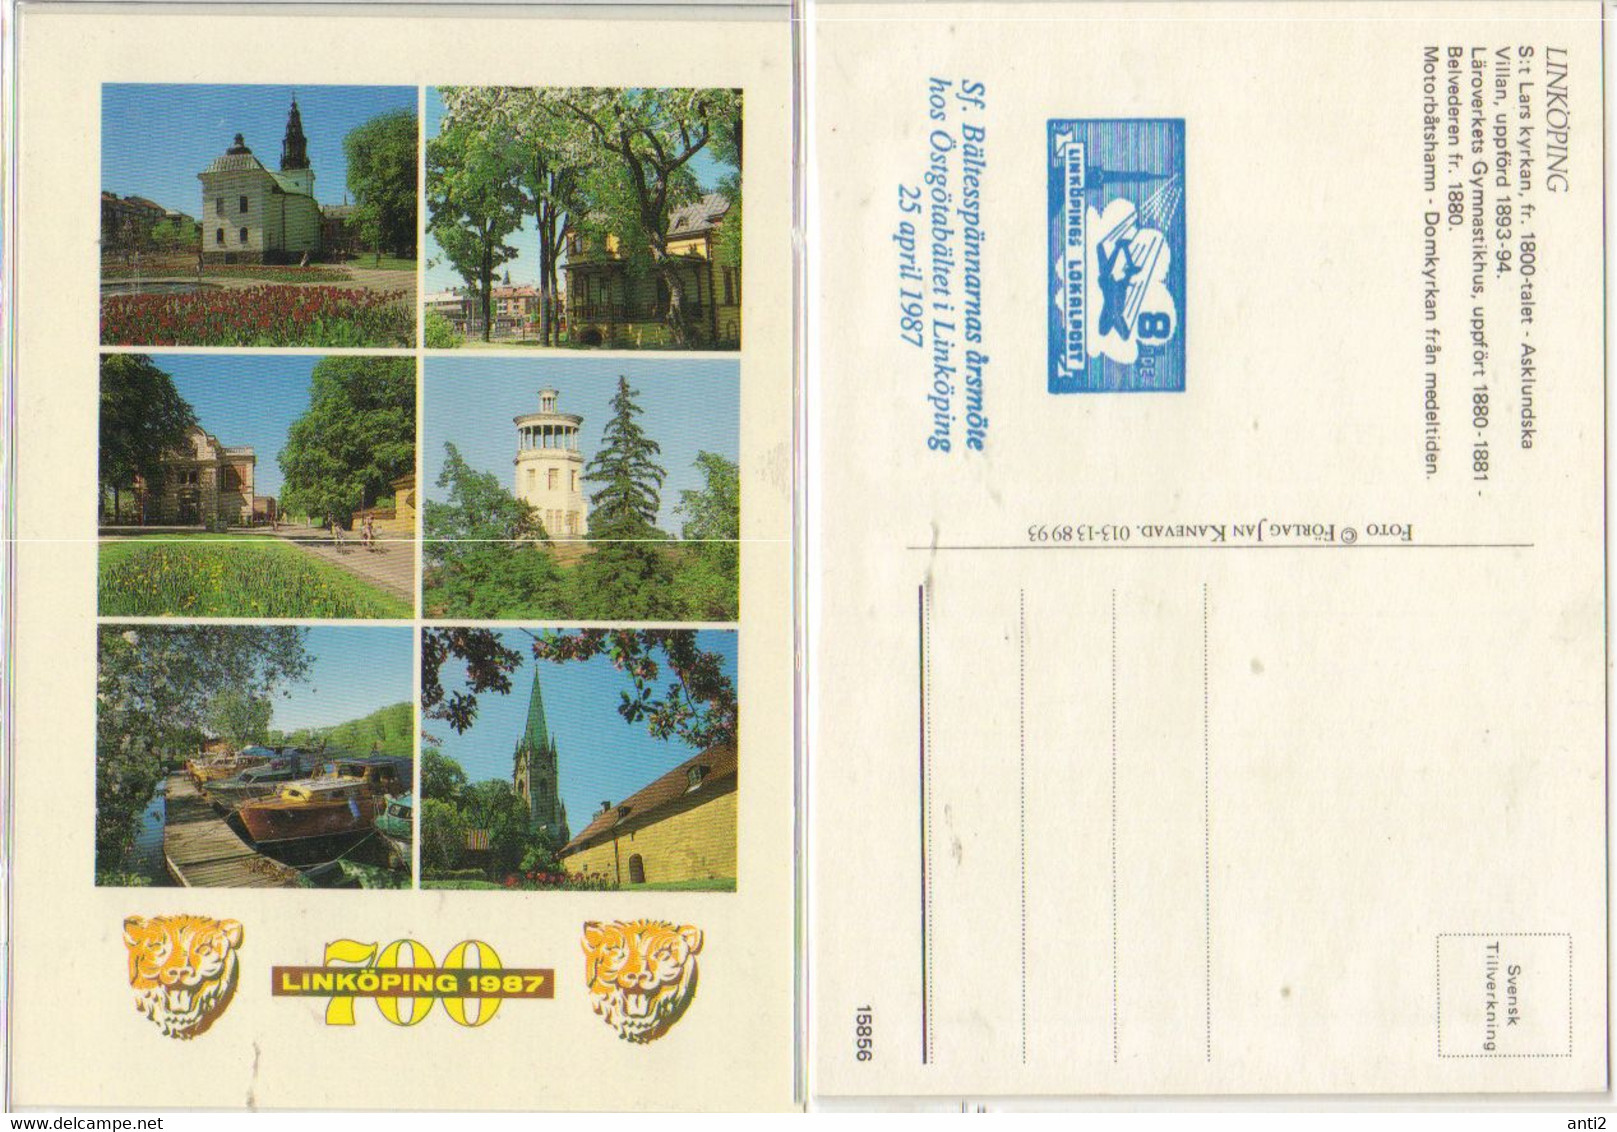 Sweden 1987 Linköping 700 Years, Card For Jubileet, With Imprinted Local Stamp 8 øre - Emissioni Locali